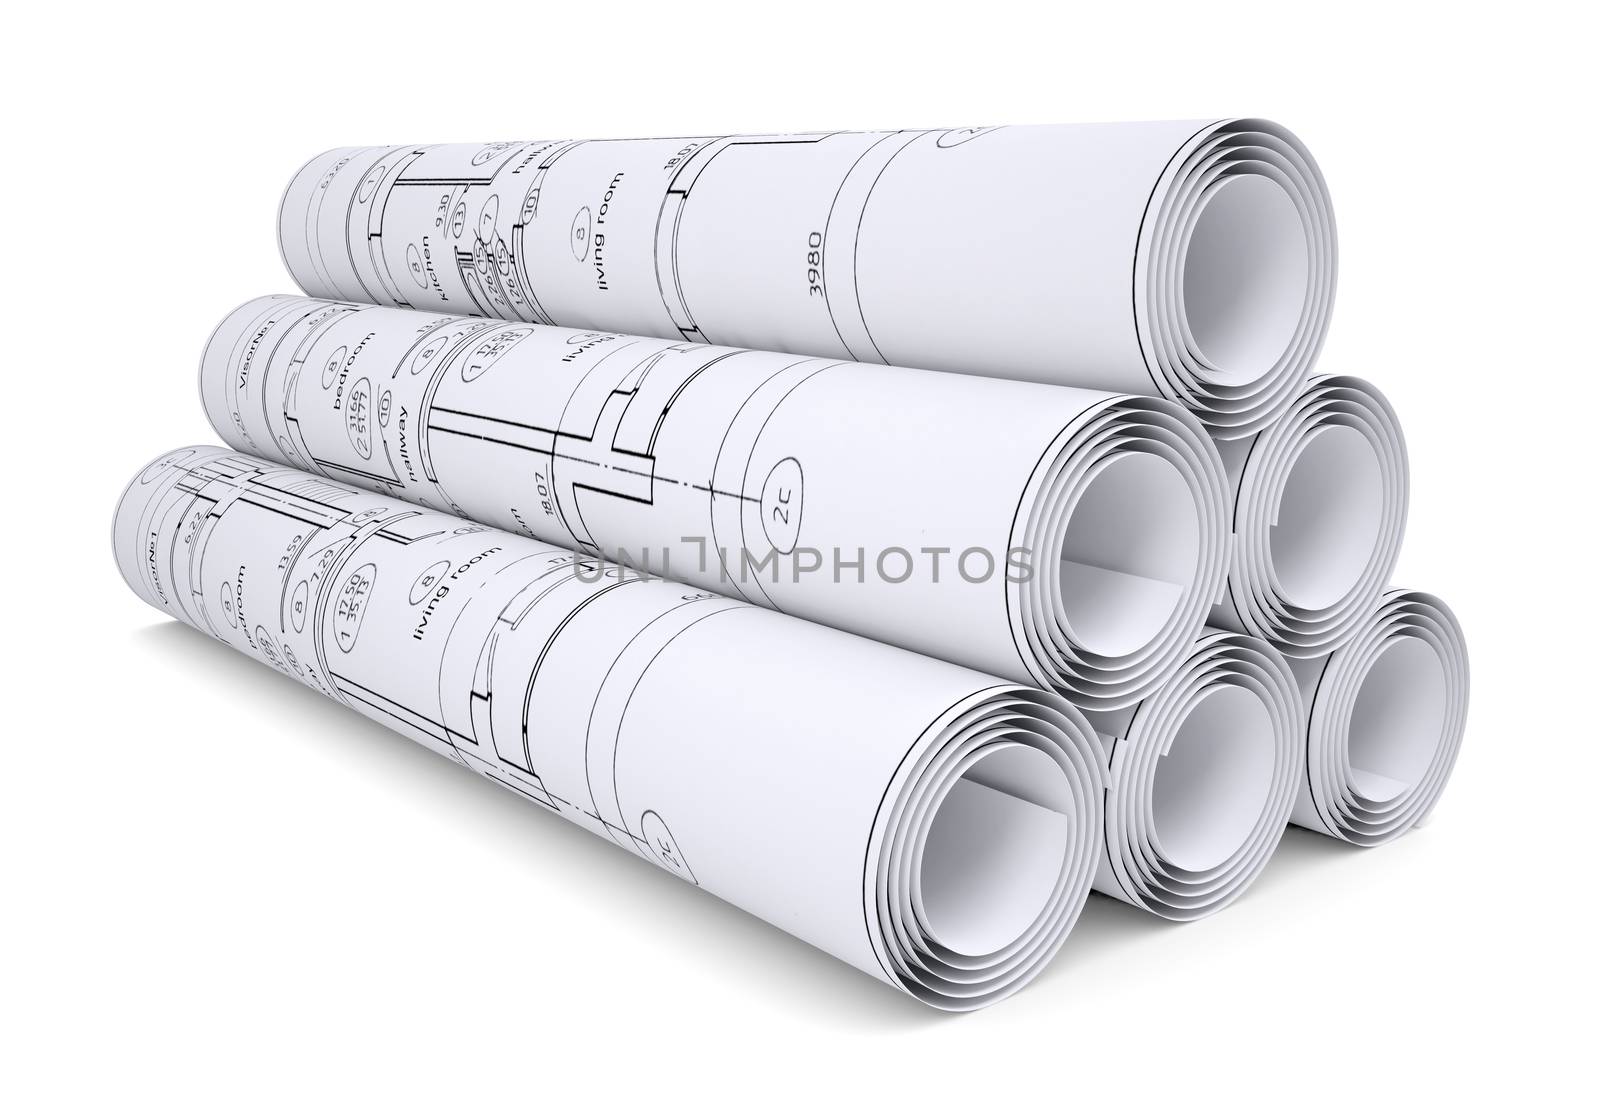 Scrolls of engineering drawings by cherezoff